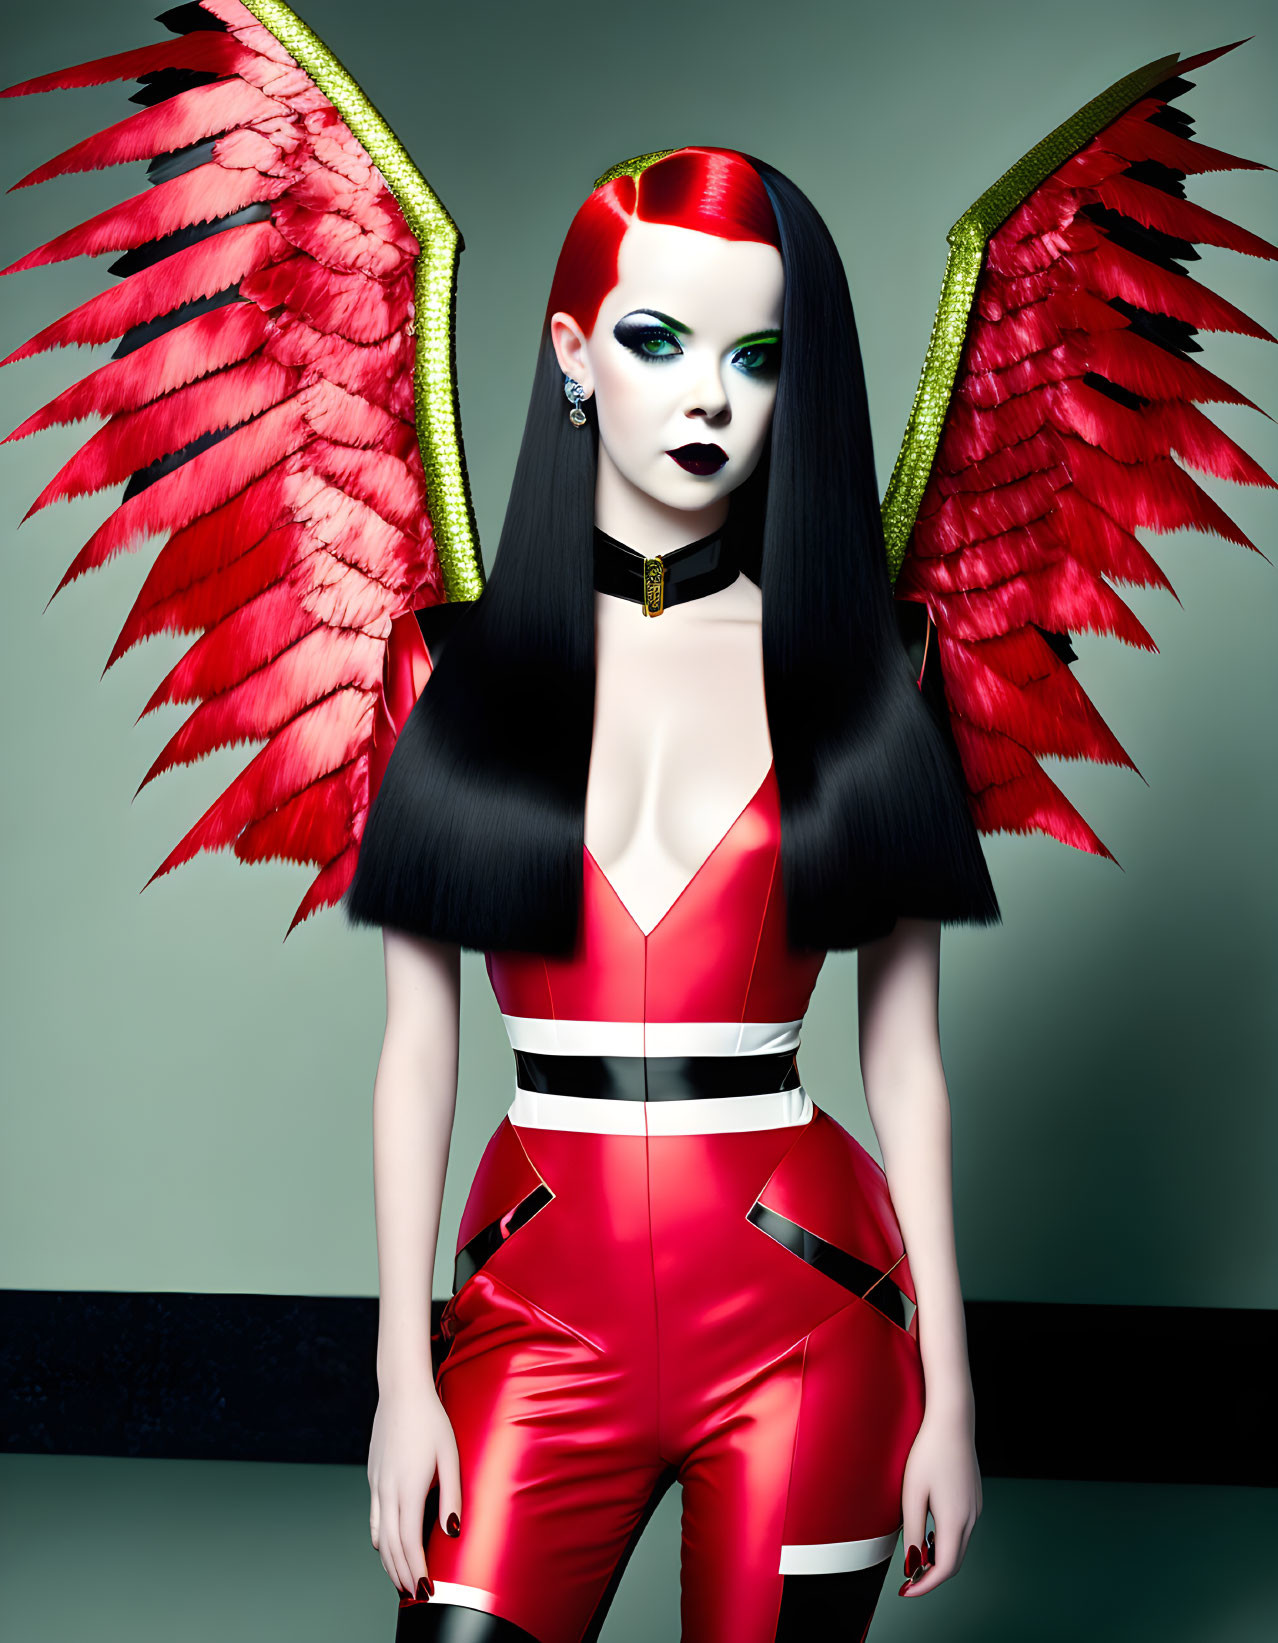 Woman with Red and Black Hair in Dramatic Red Winged Costume